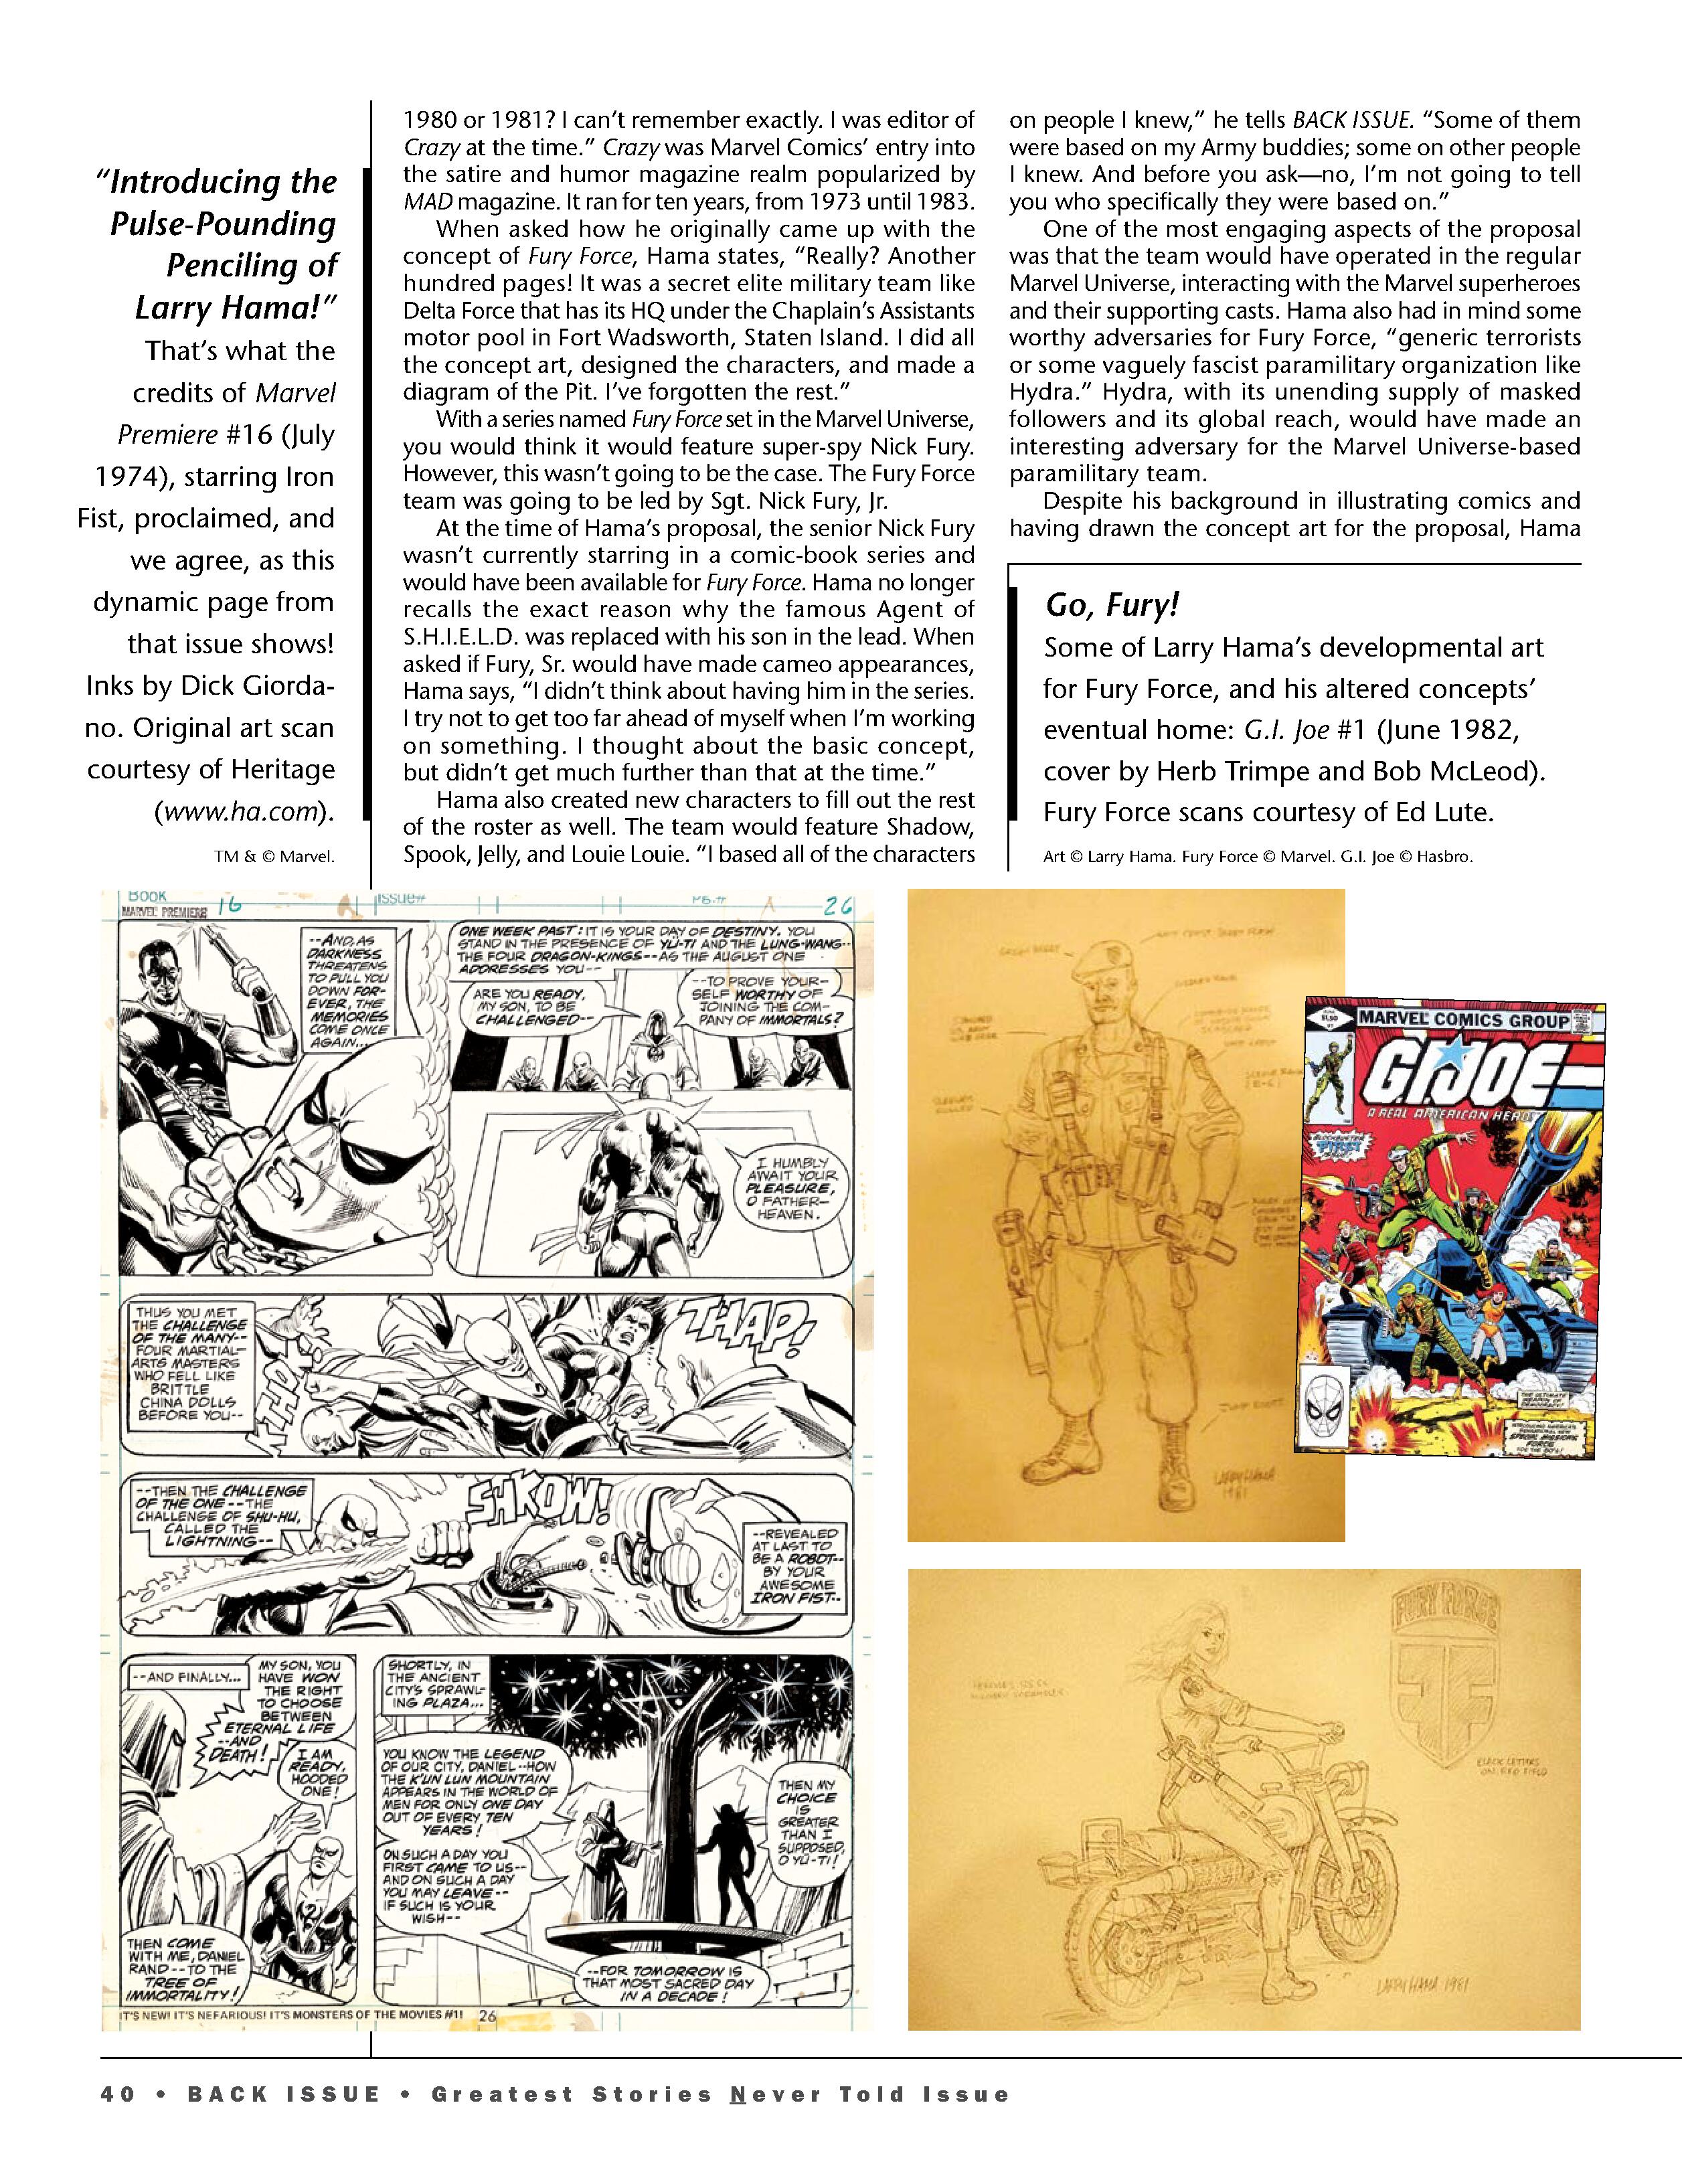 Read online Back Issue comic -  Issue #118 - 42